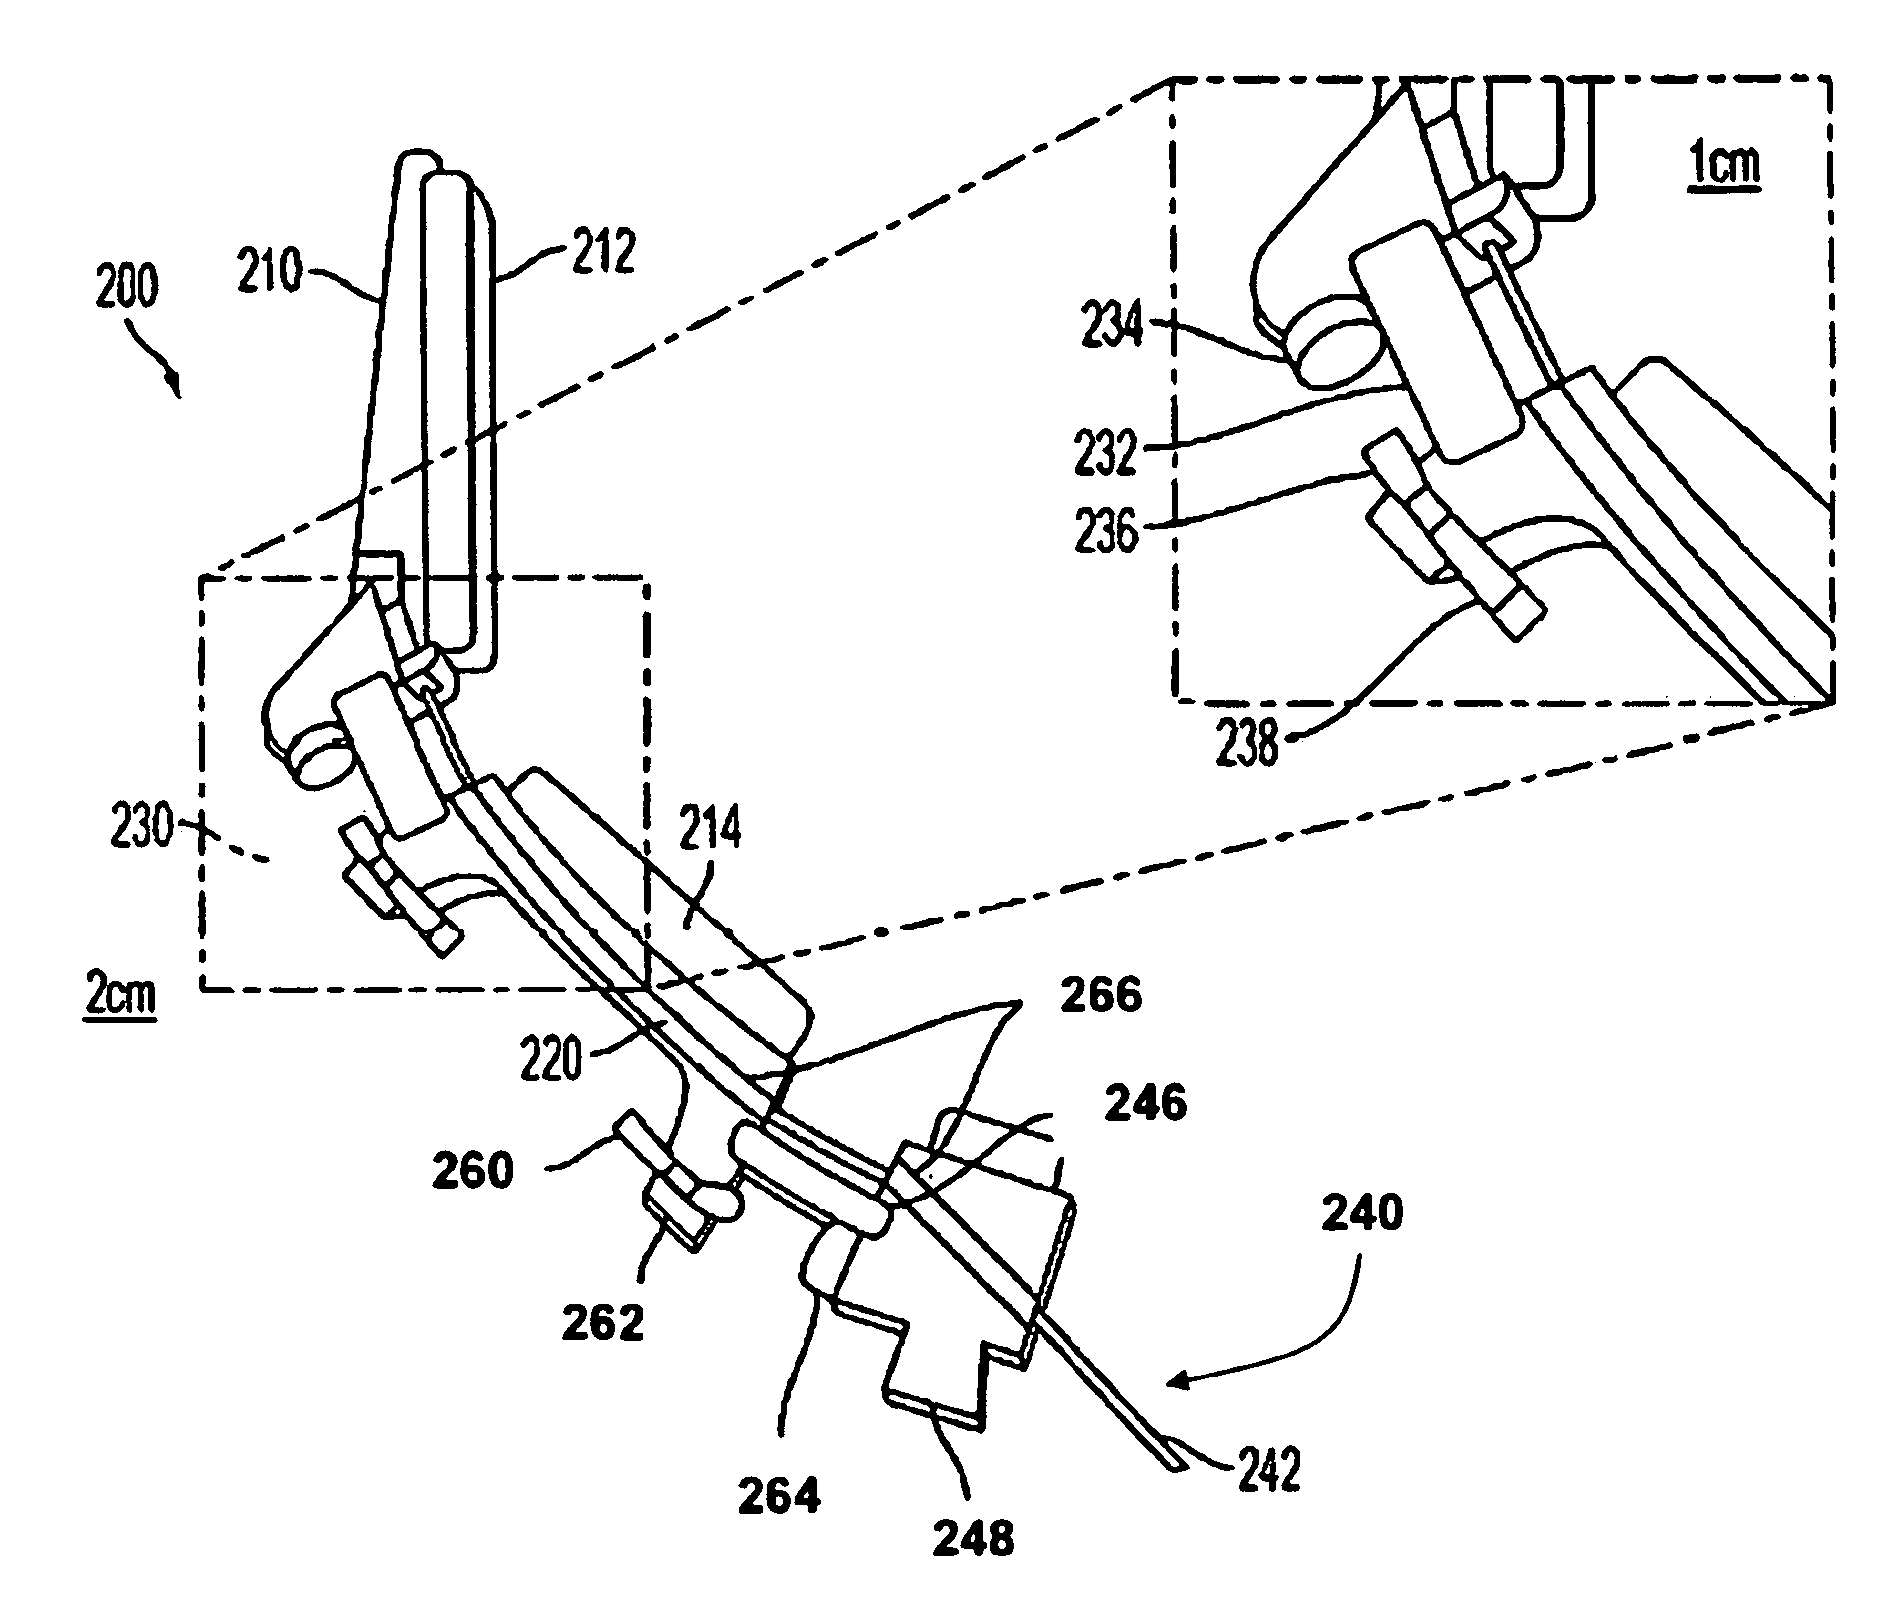 Robust compliant adaptive grasper and method of manufacturing same